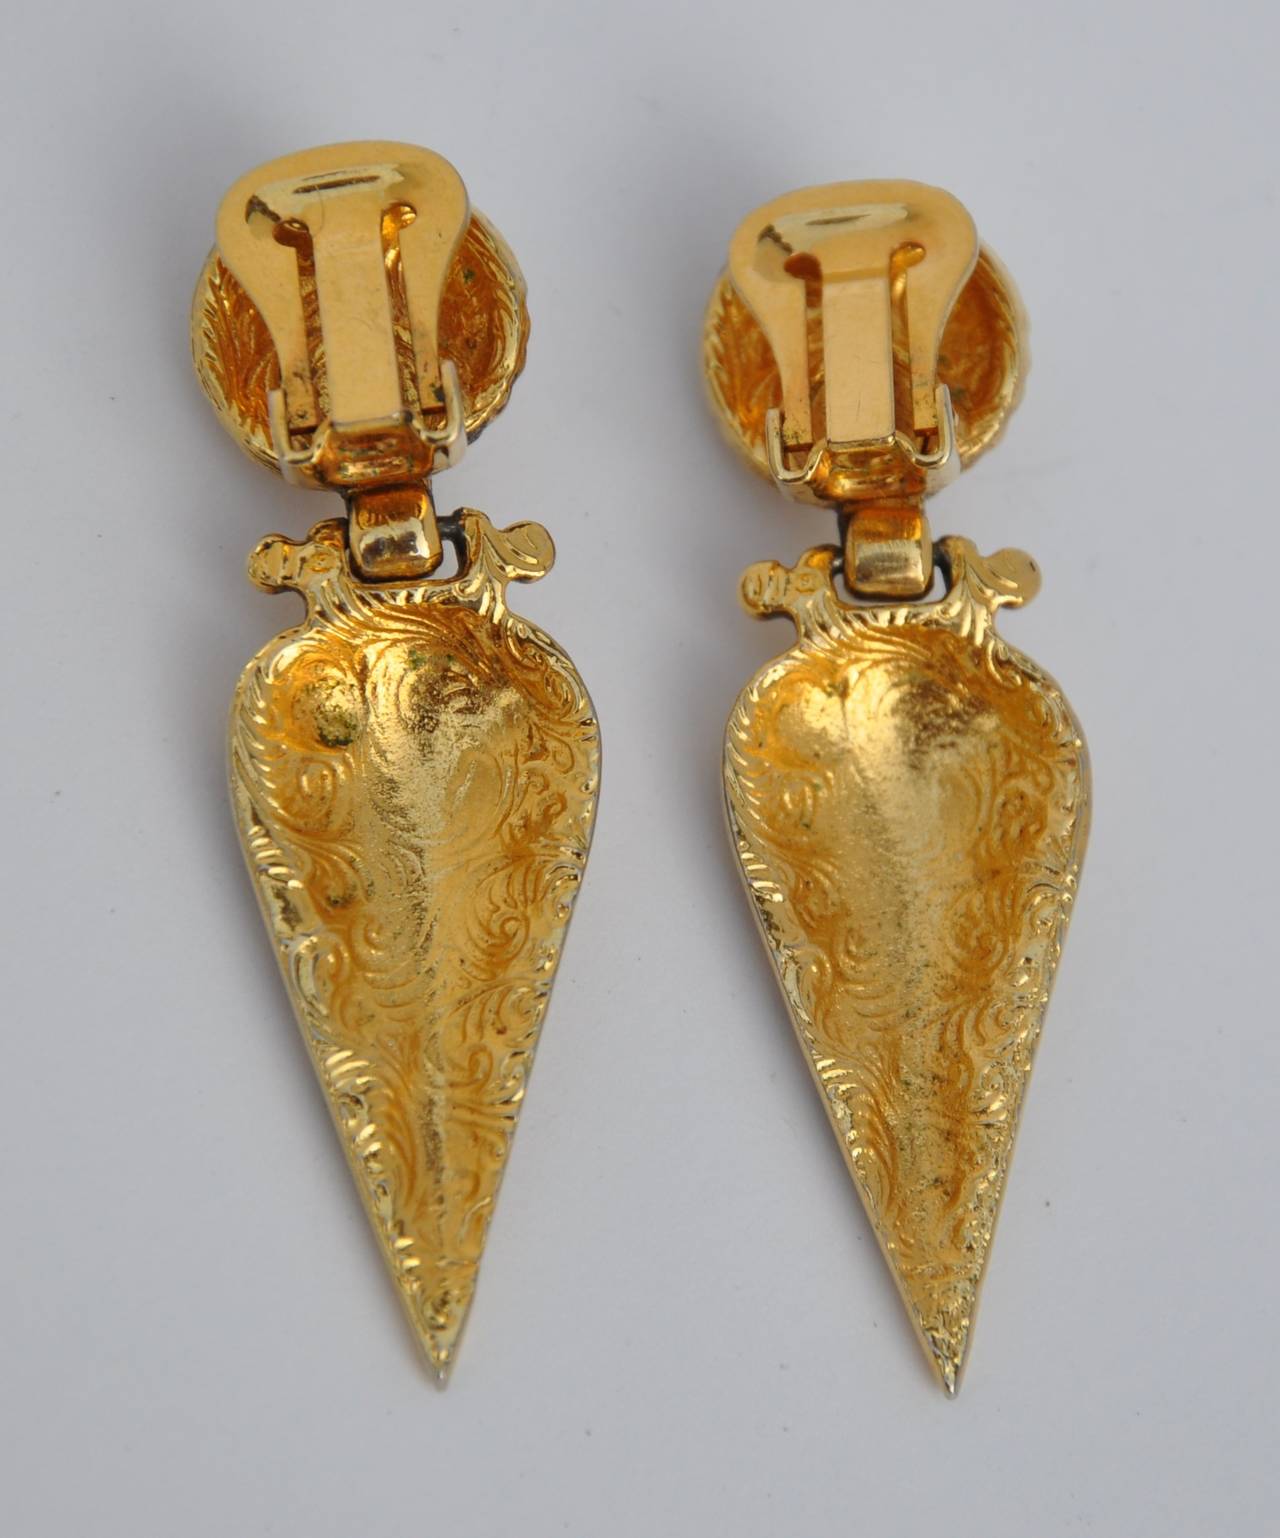 These pair of gilded gold vermeil finish drop earrings measures 2 1/8" in height, width is 5/8", depth is 2/8".